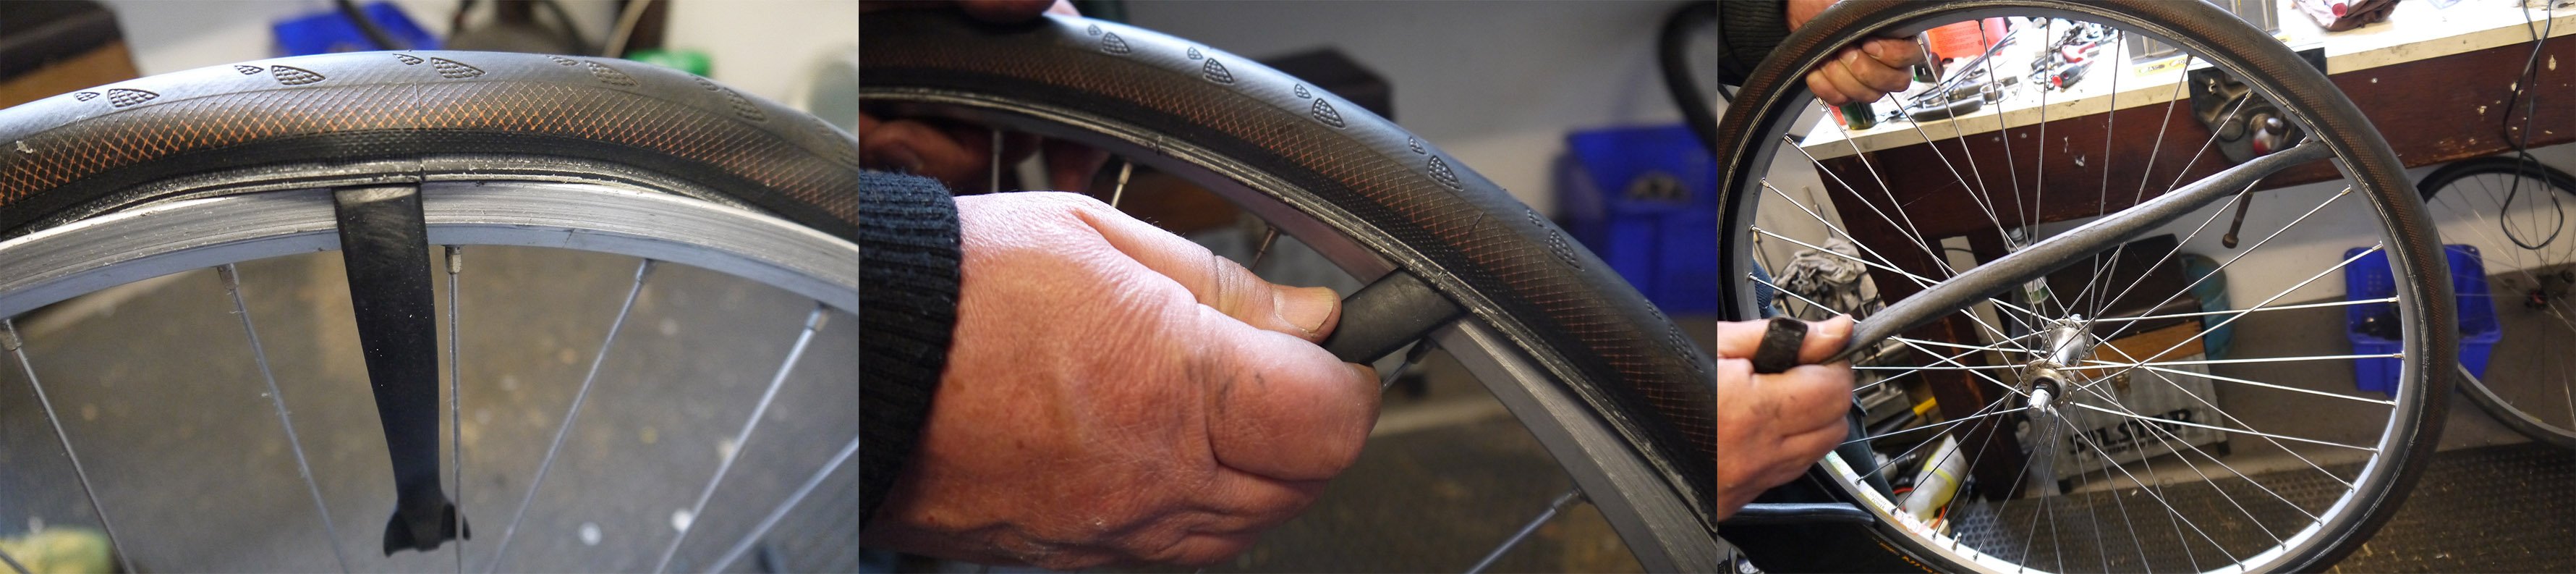 how to fix a puncture 1 bicycle inner tube